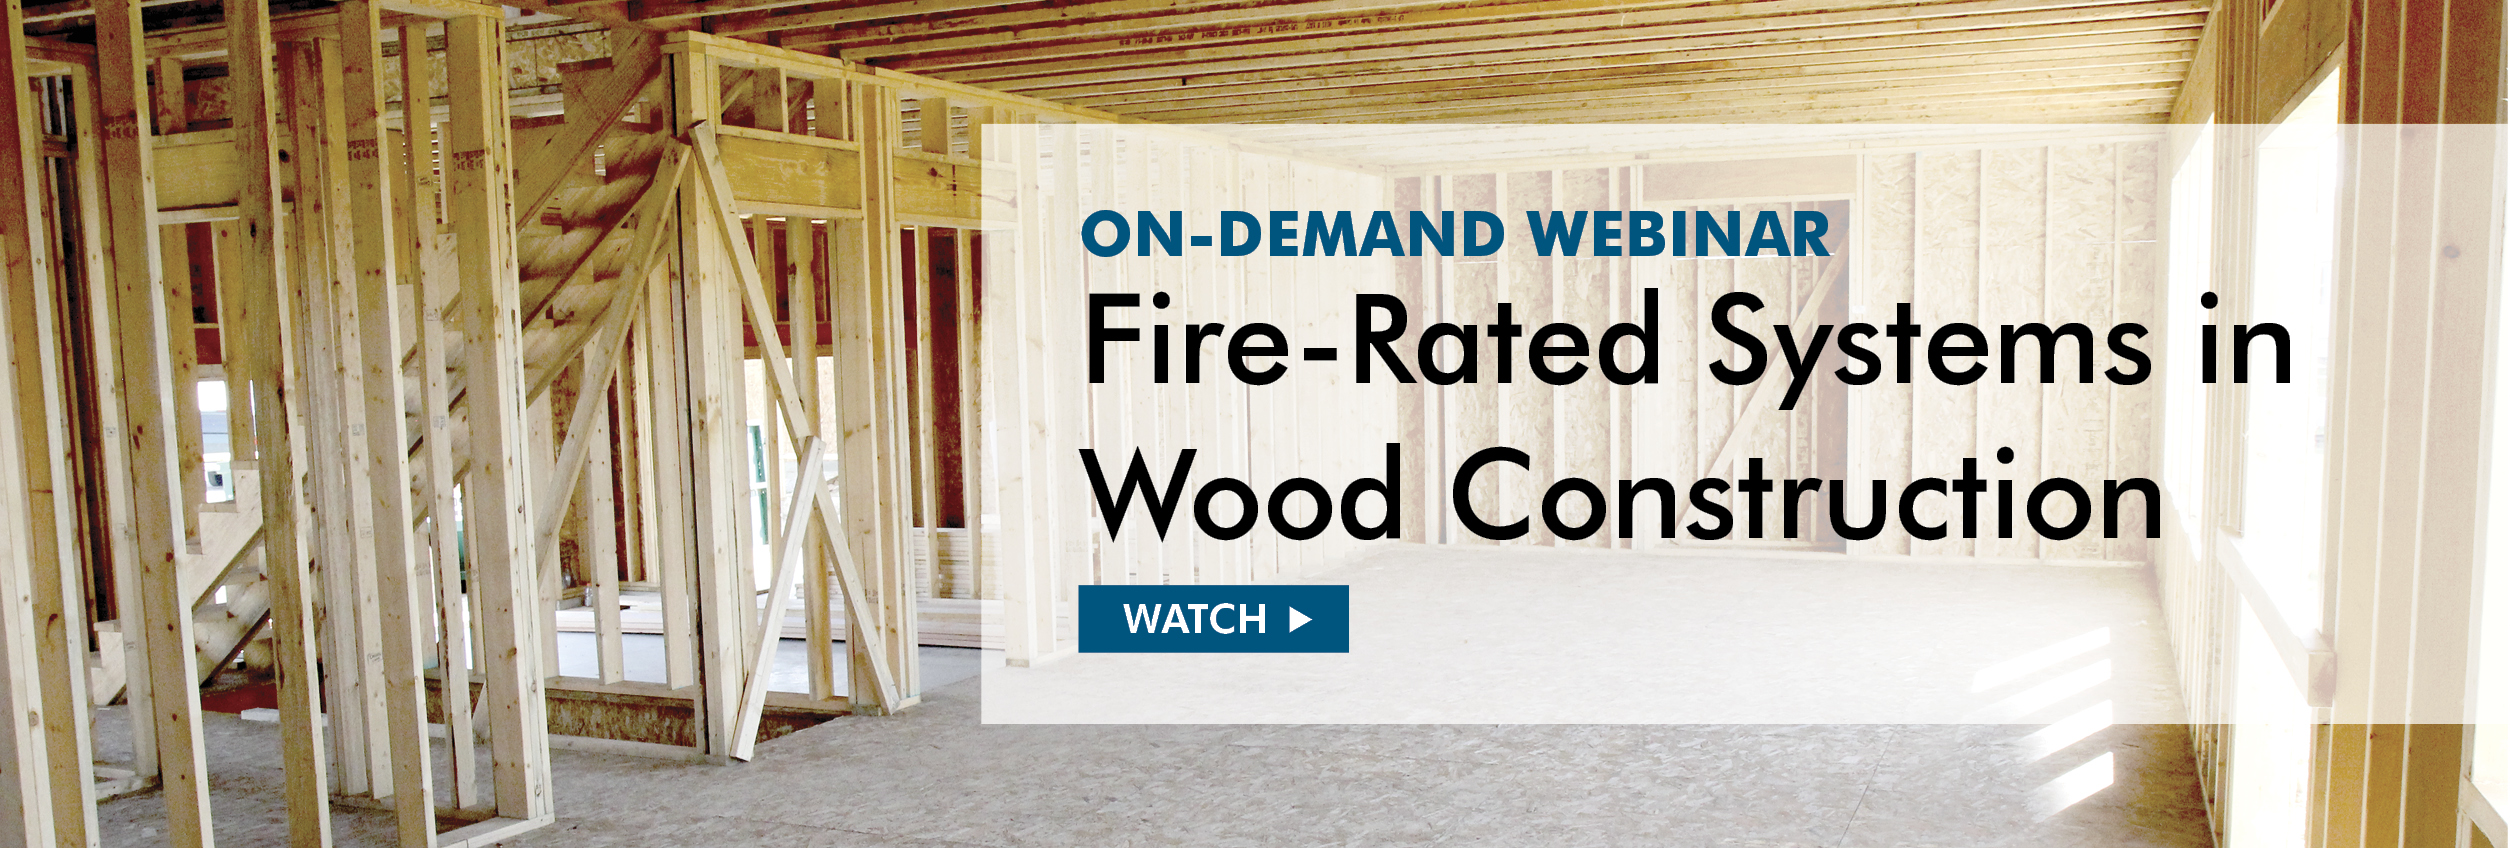 Fire-Rated Systems in Wood Construction Webinar